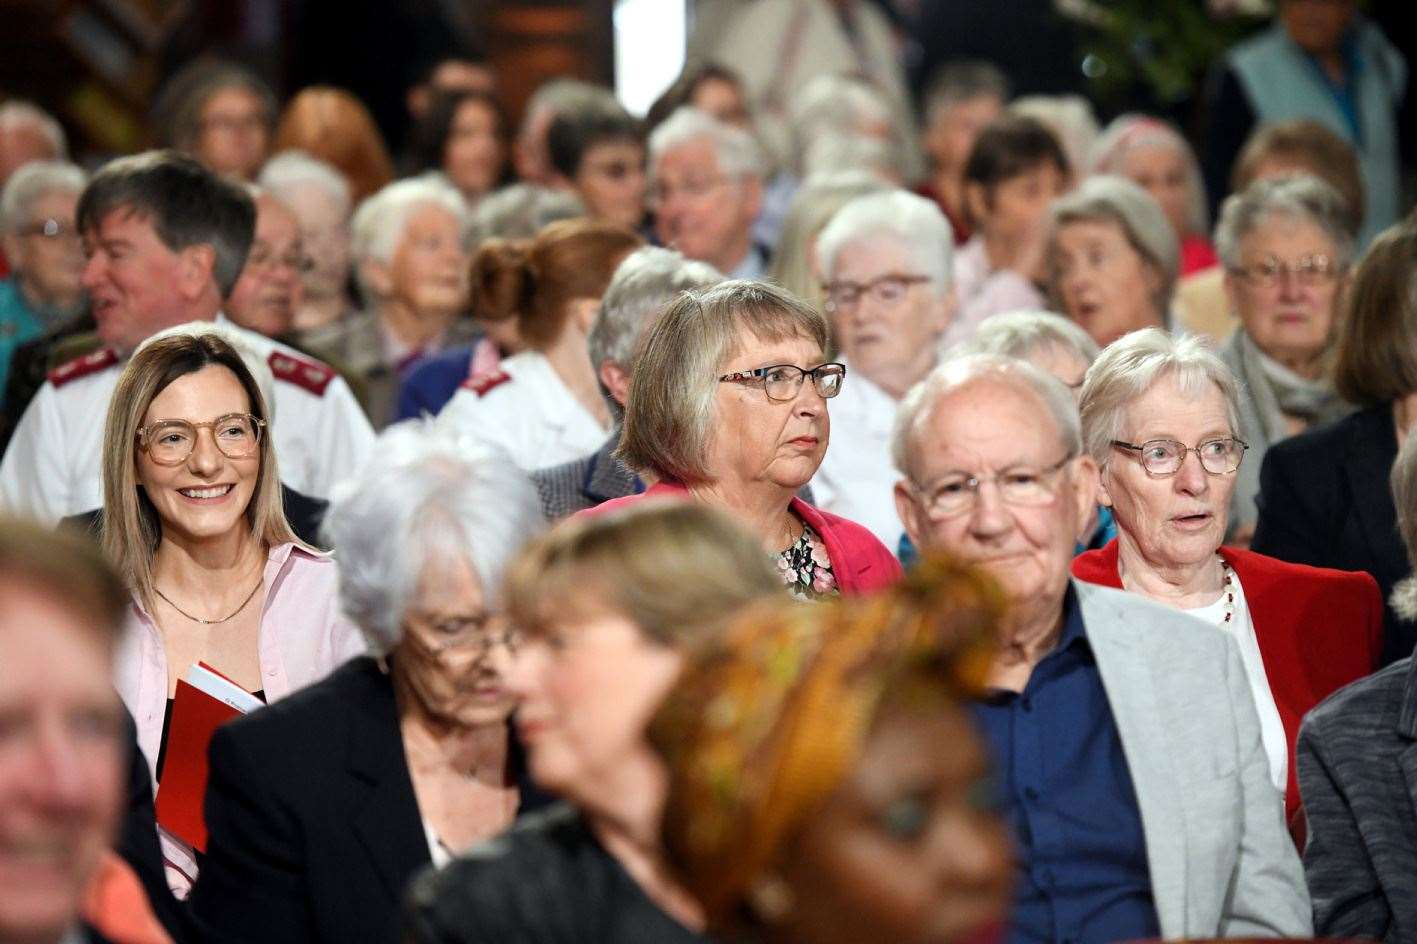 The congregation sat in the cathedral. Picture: James Mackenzie.